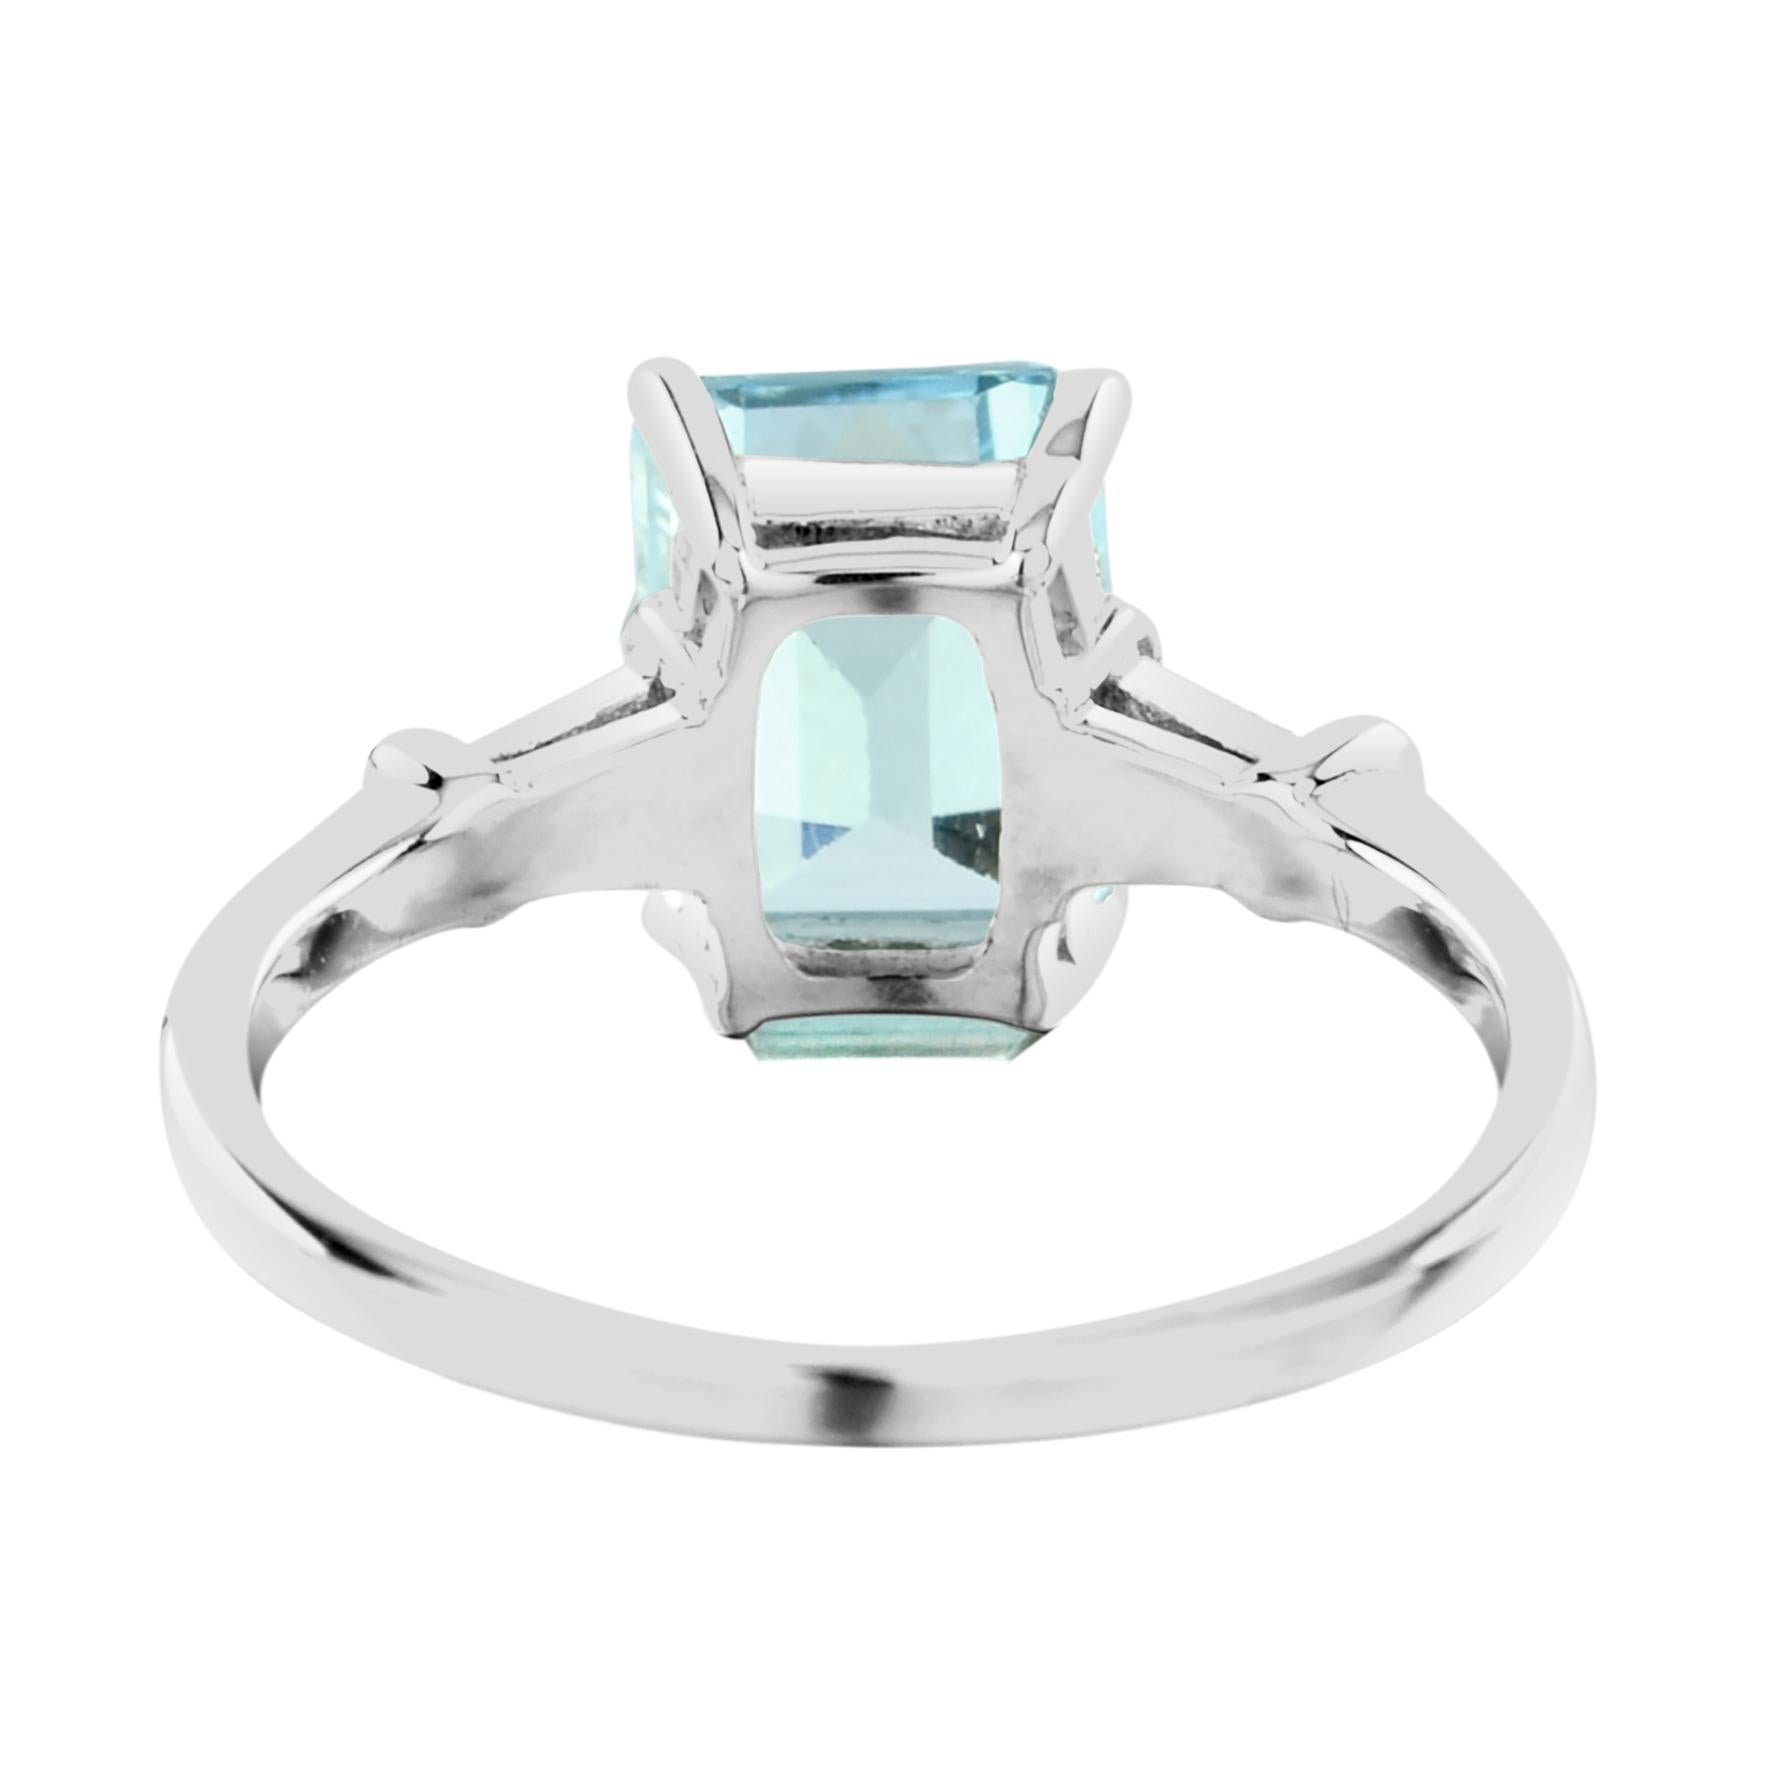 The One Blue Topaz with Baguette Diamond Engagement Ring in 14K White Gold 4